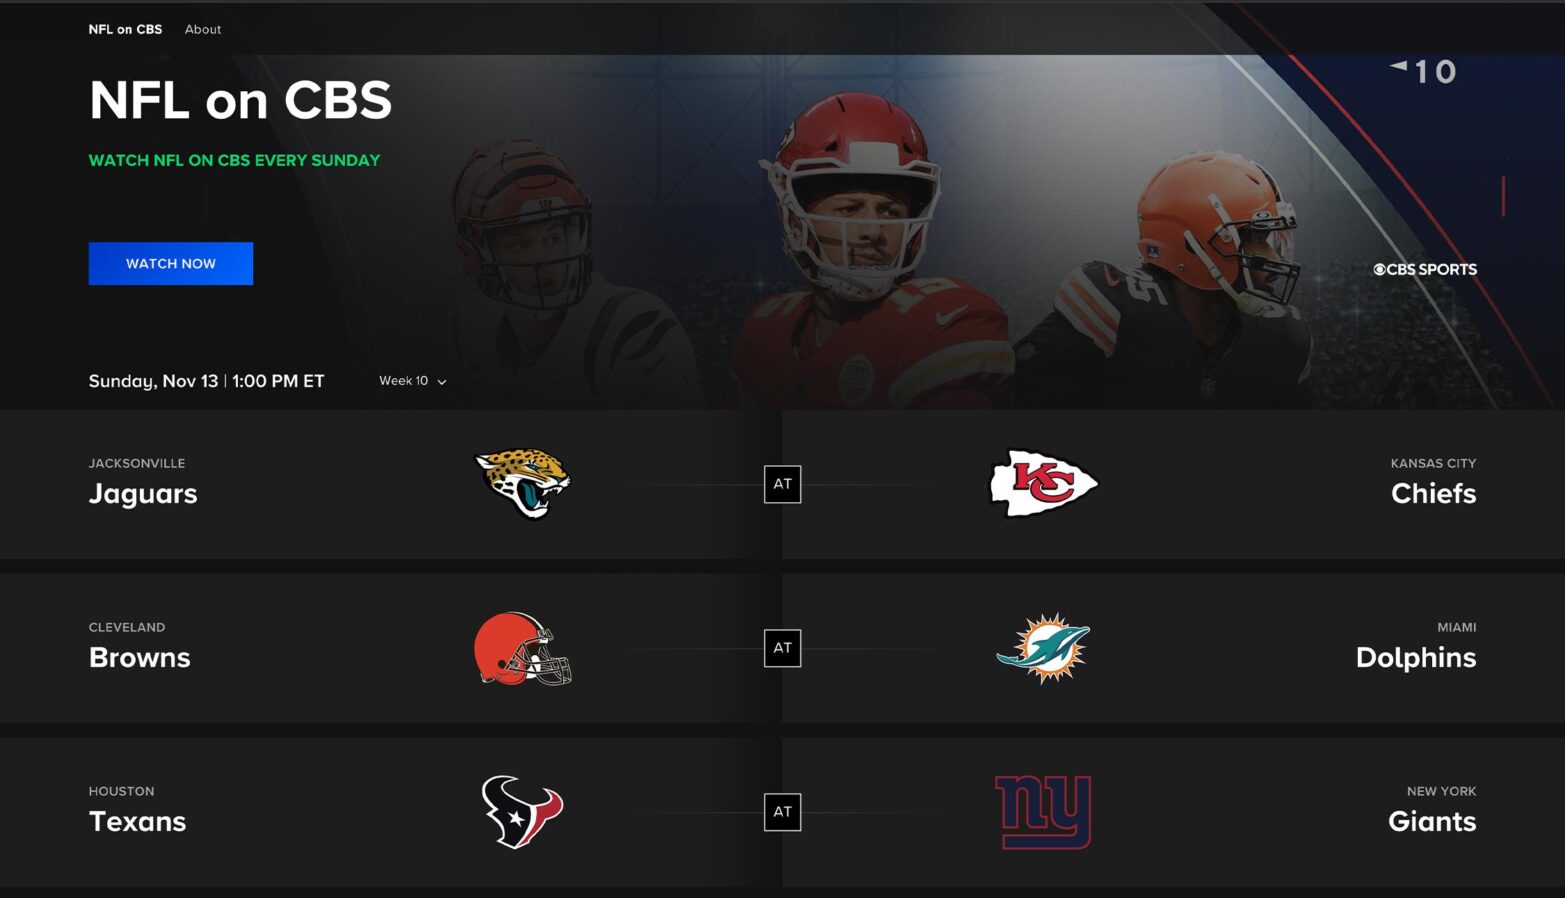 nfl plus streaming service